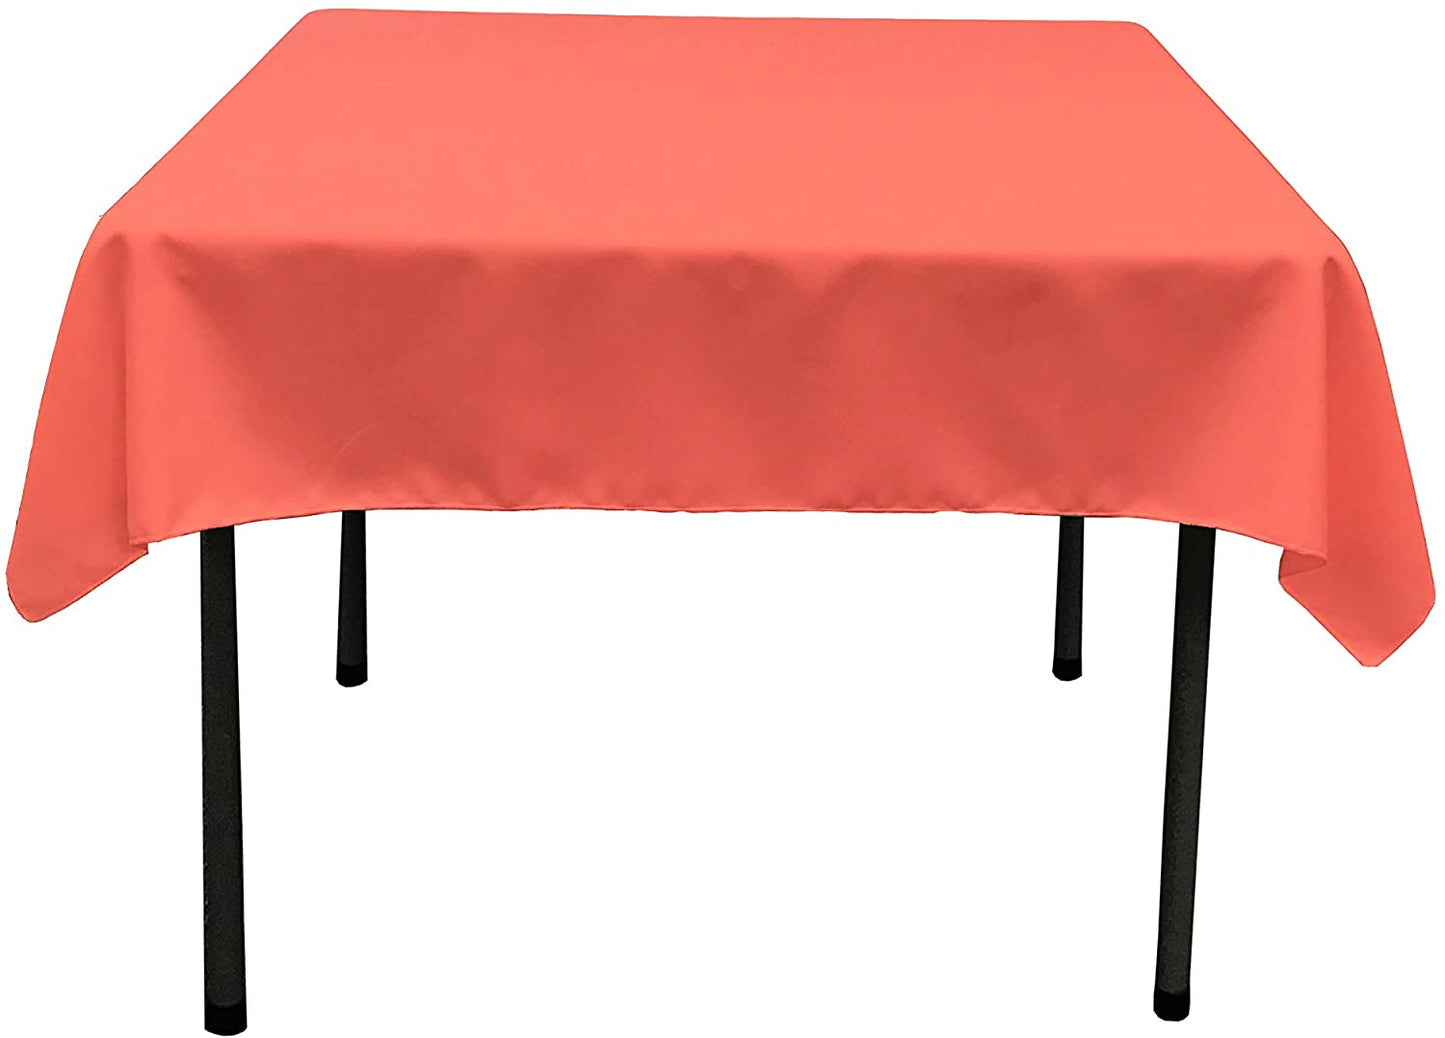 Polyester Poplin Washable Square Tablecloth, Stain and Wrinkle Resistant Table Cover Coral